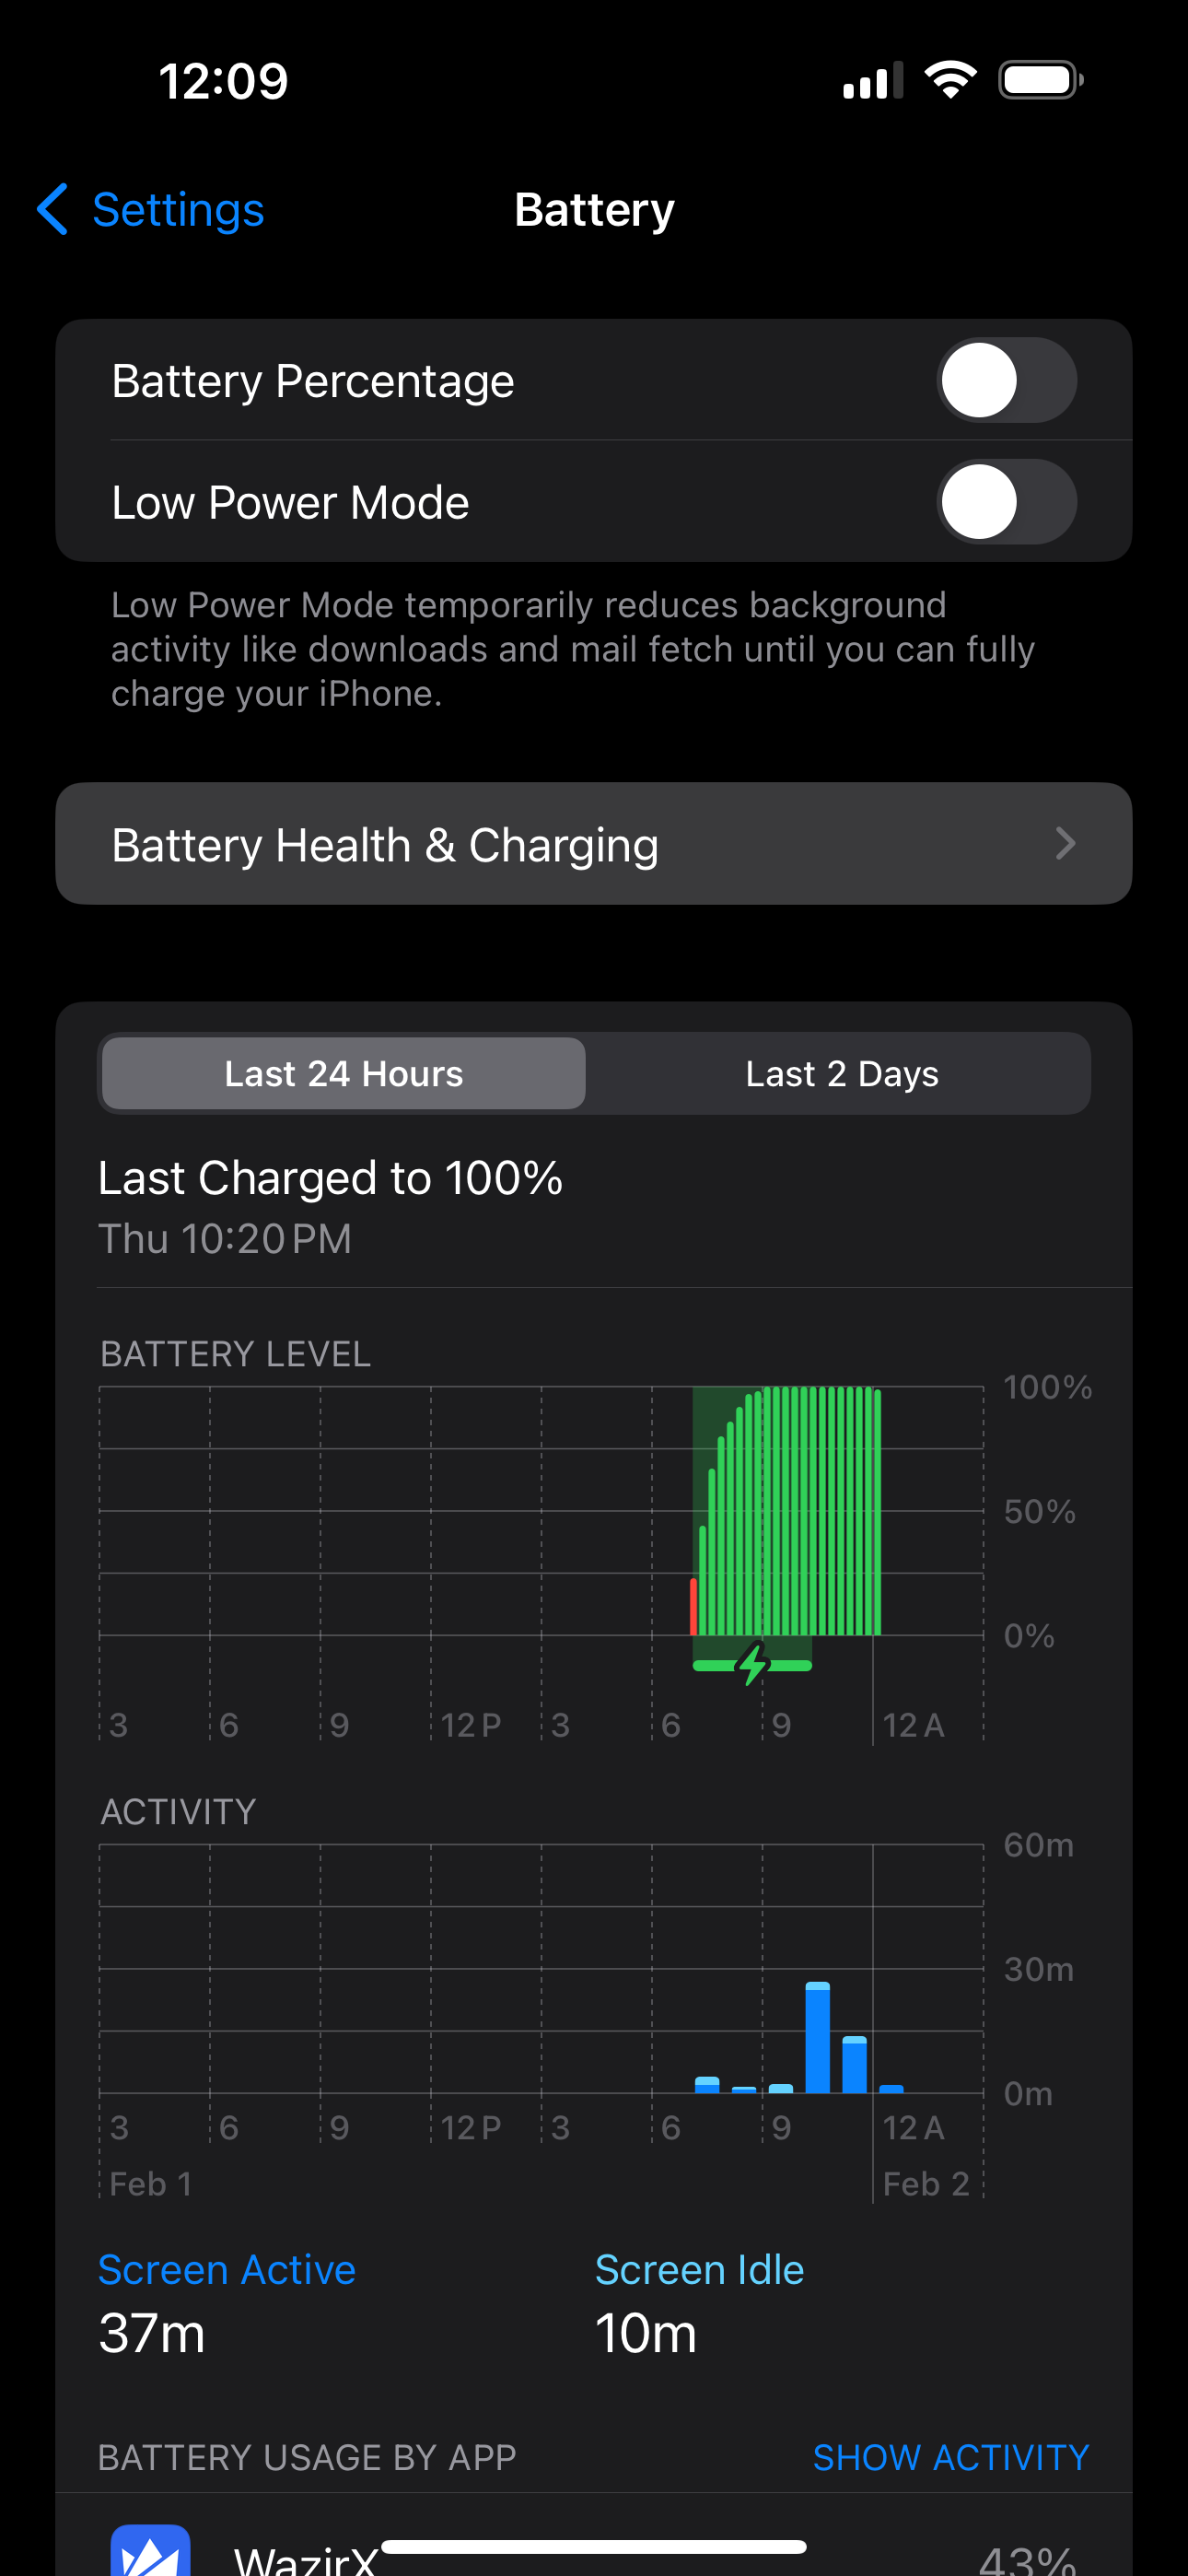 Battery Health & Charging option in the Battery Settings menu on iOS